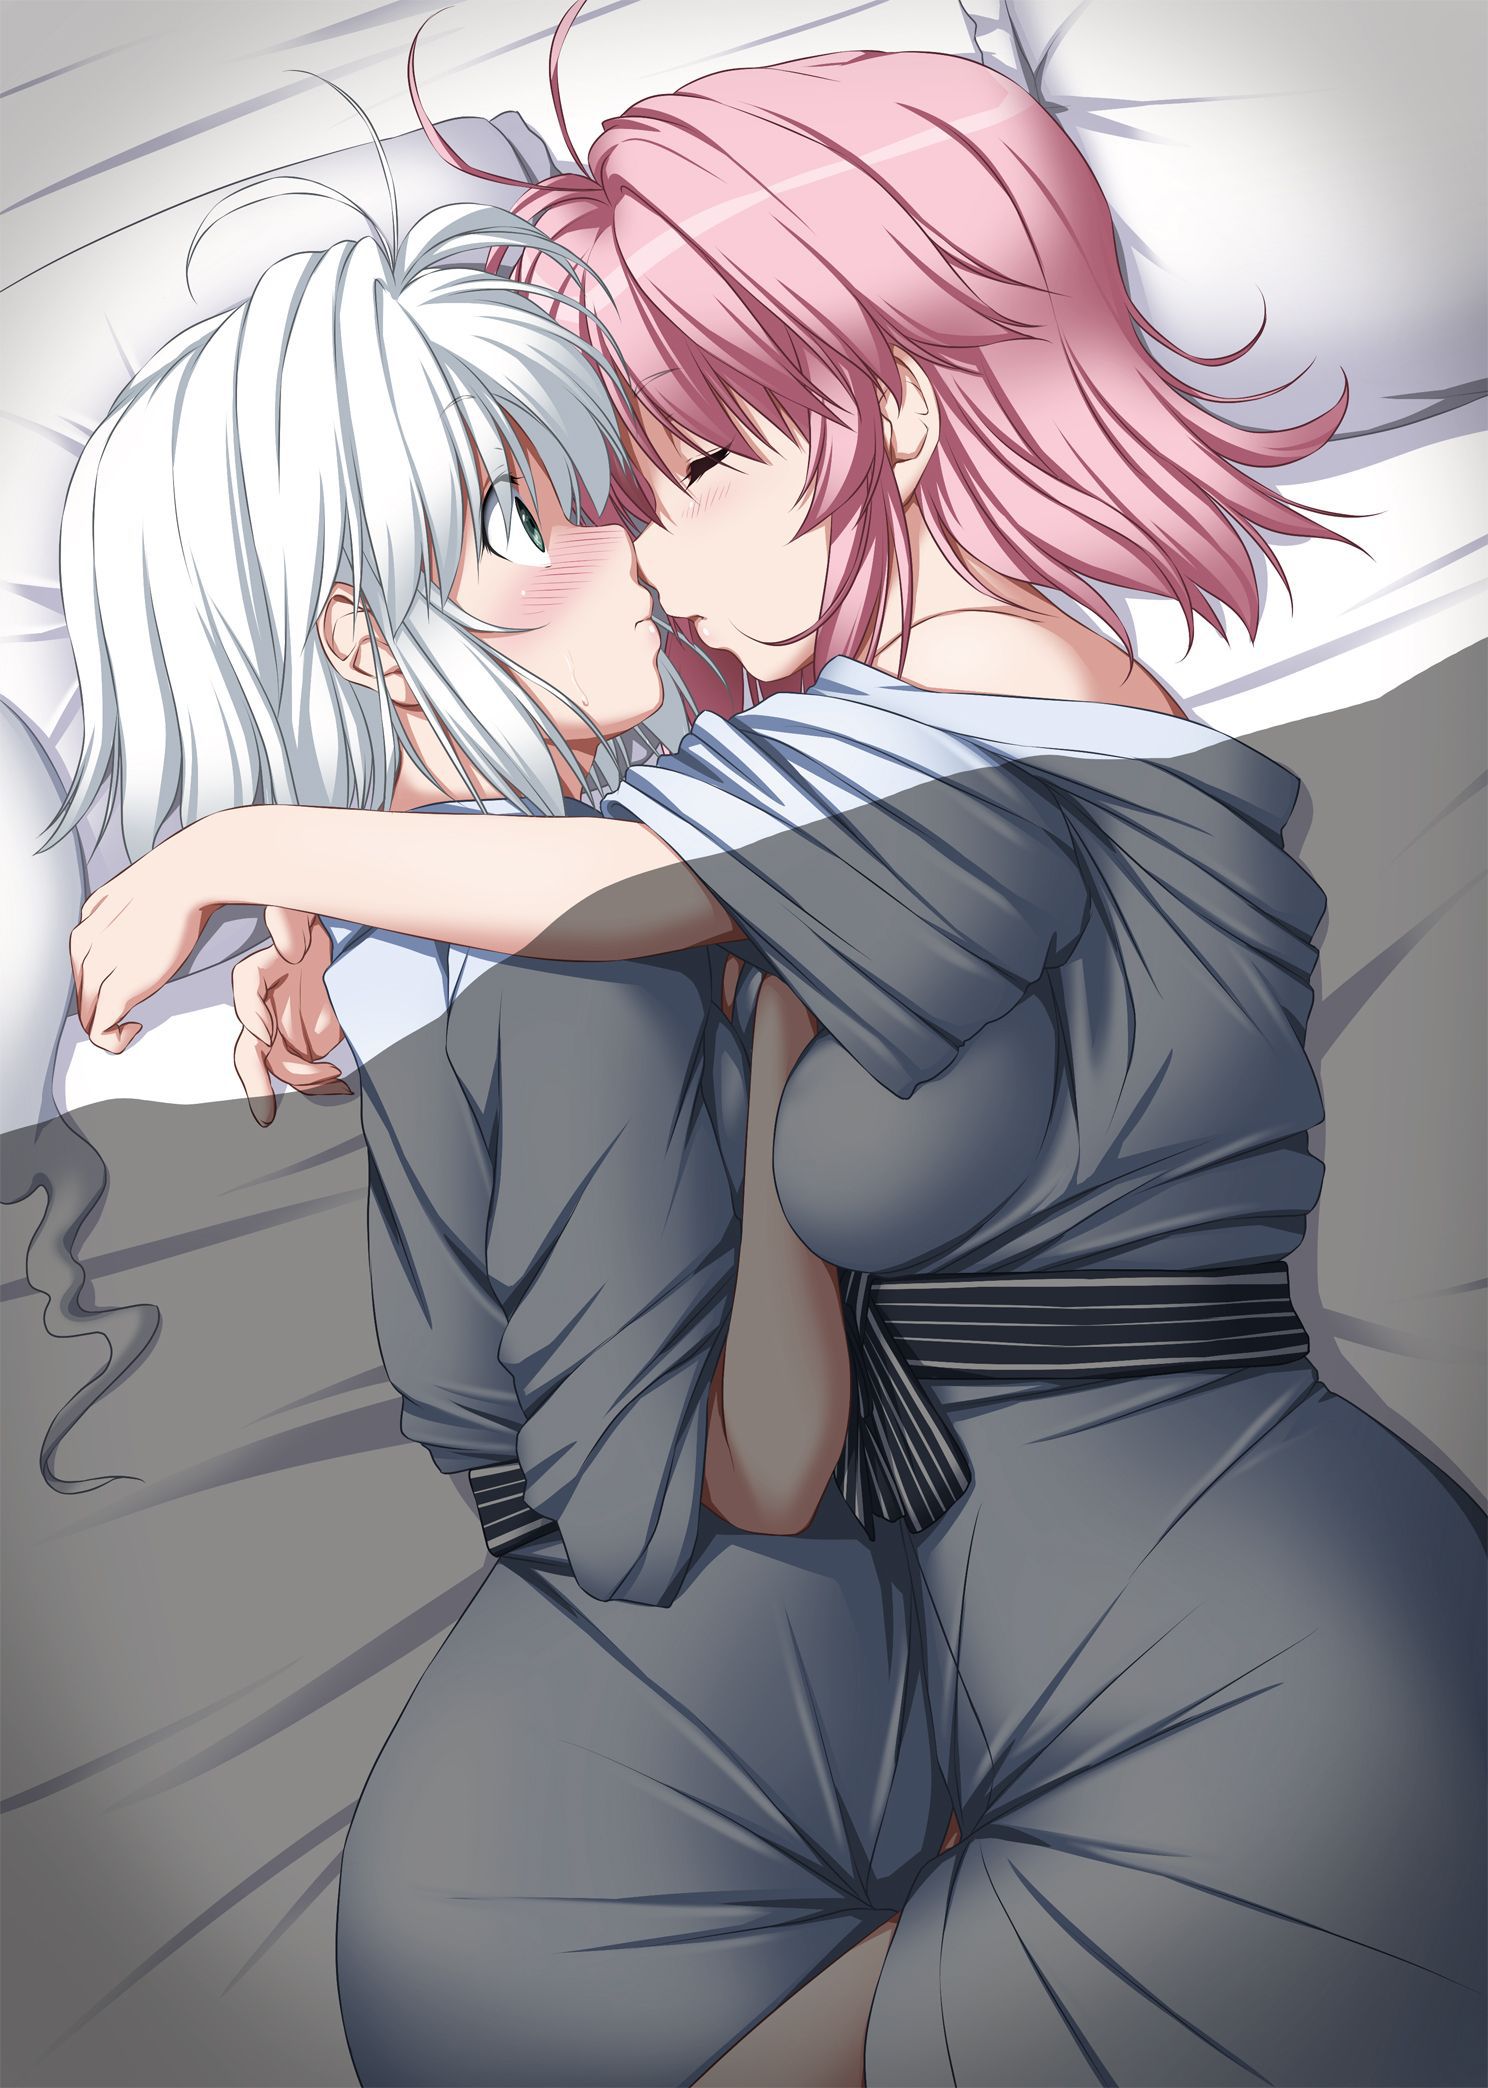 [secondary/ZIP] lovely yuri Lesbian image of a cute girl each other 20